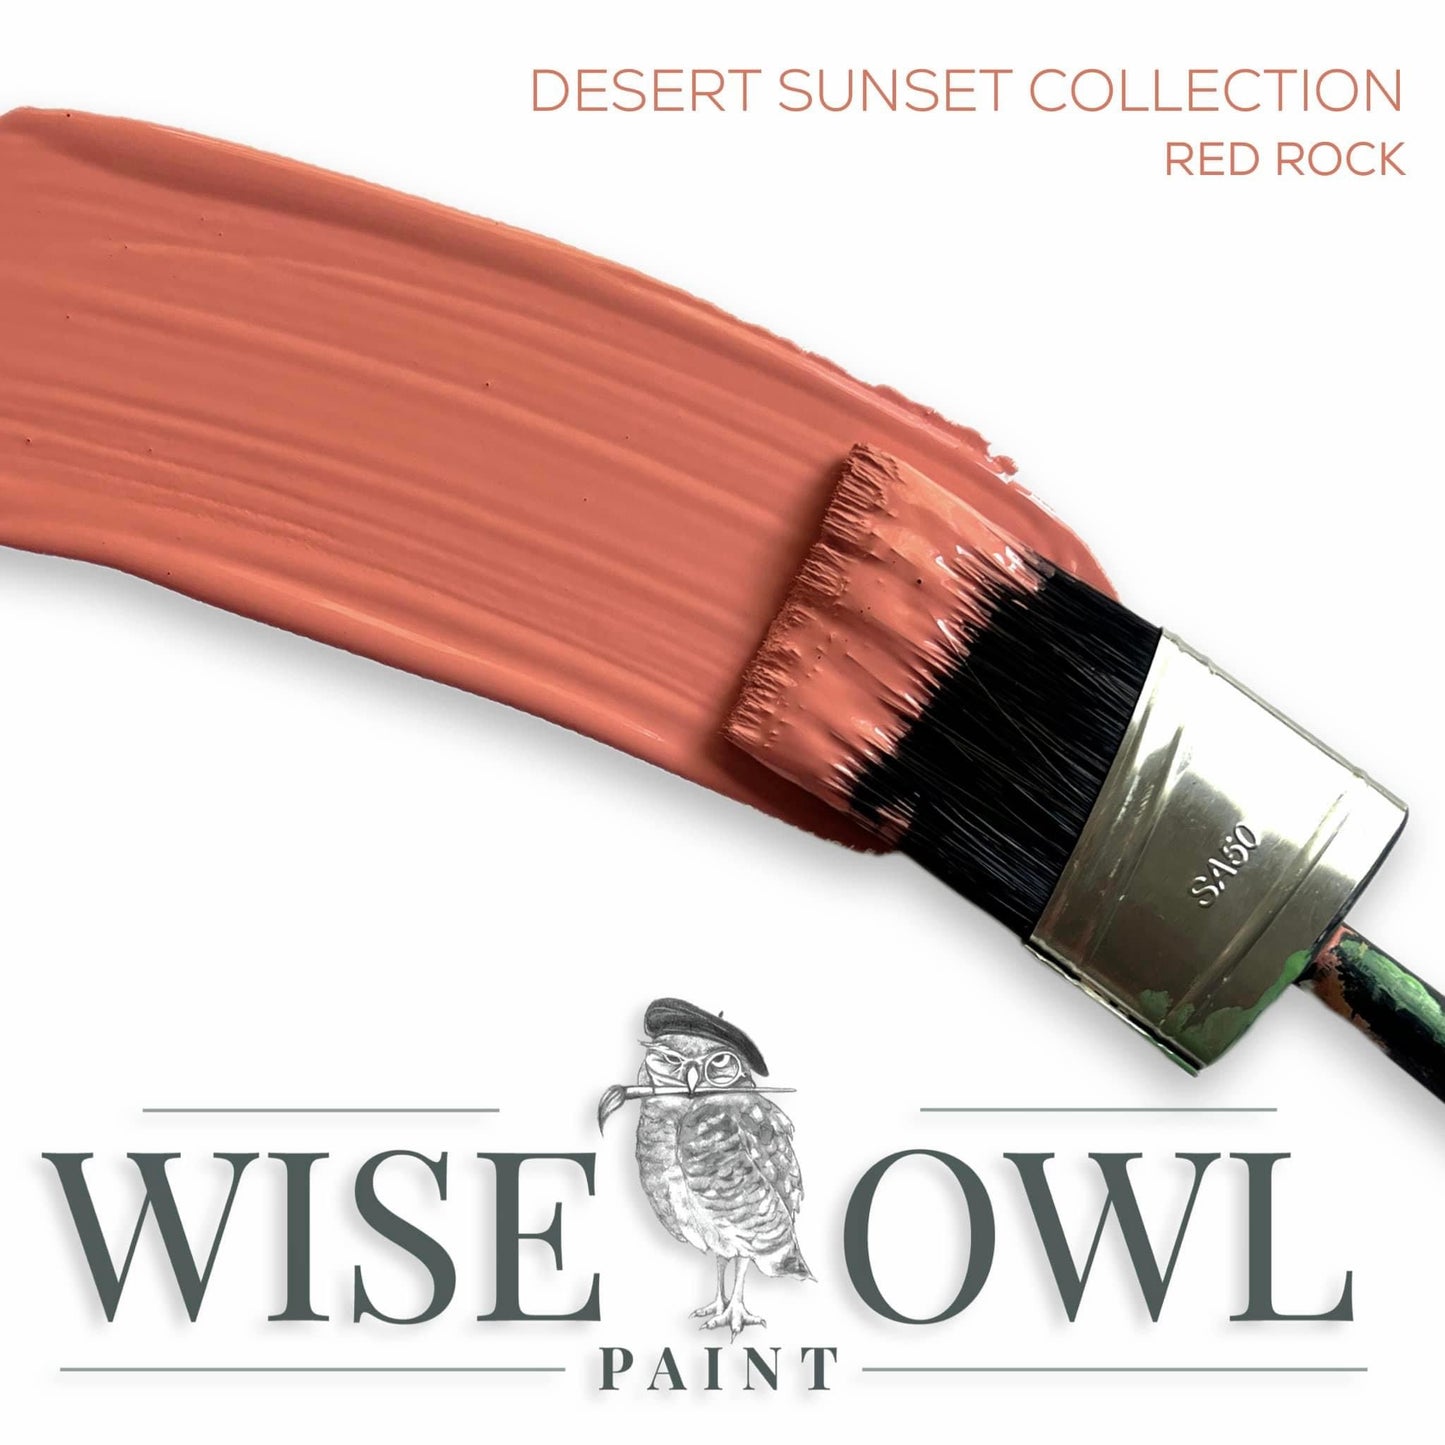 Wise Owl Chalk Synthesis Paint - Red Rock